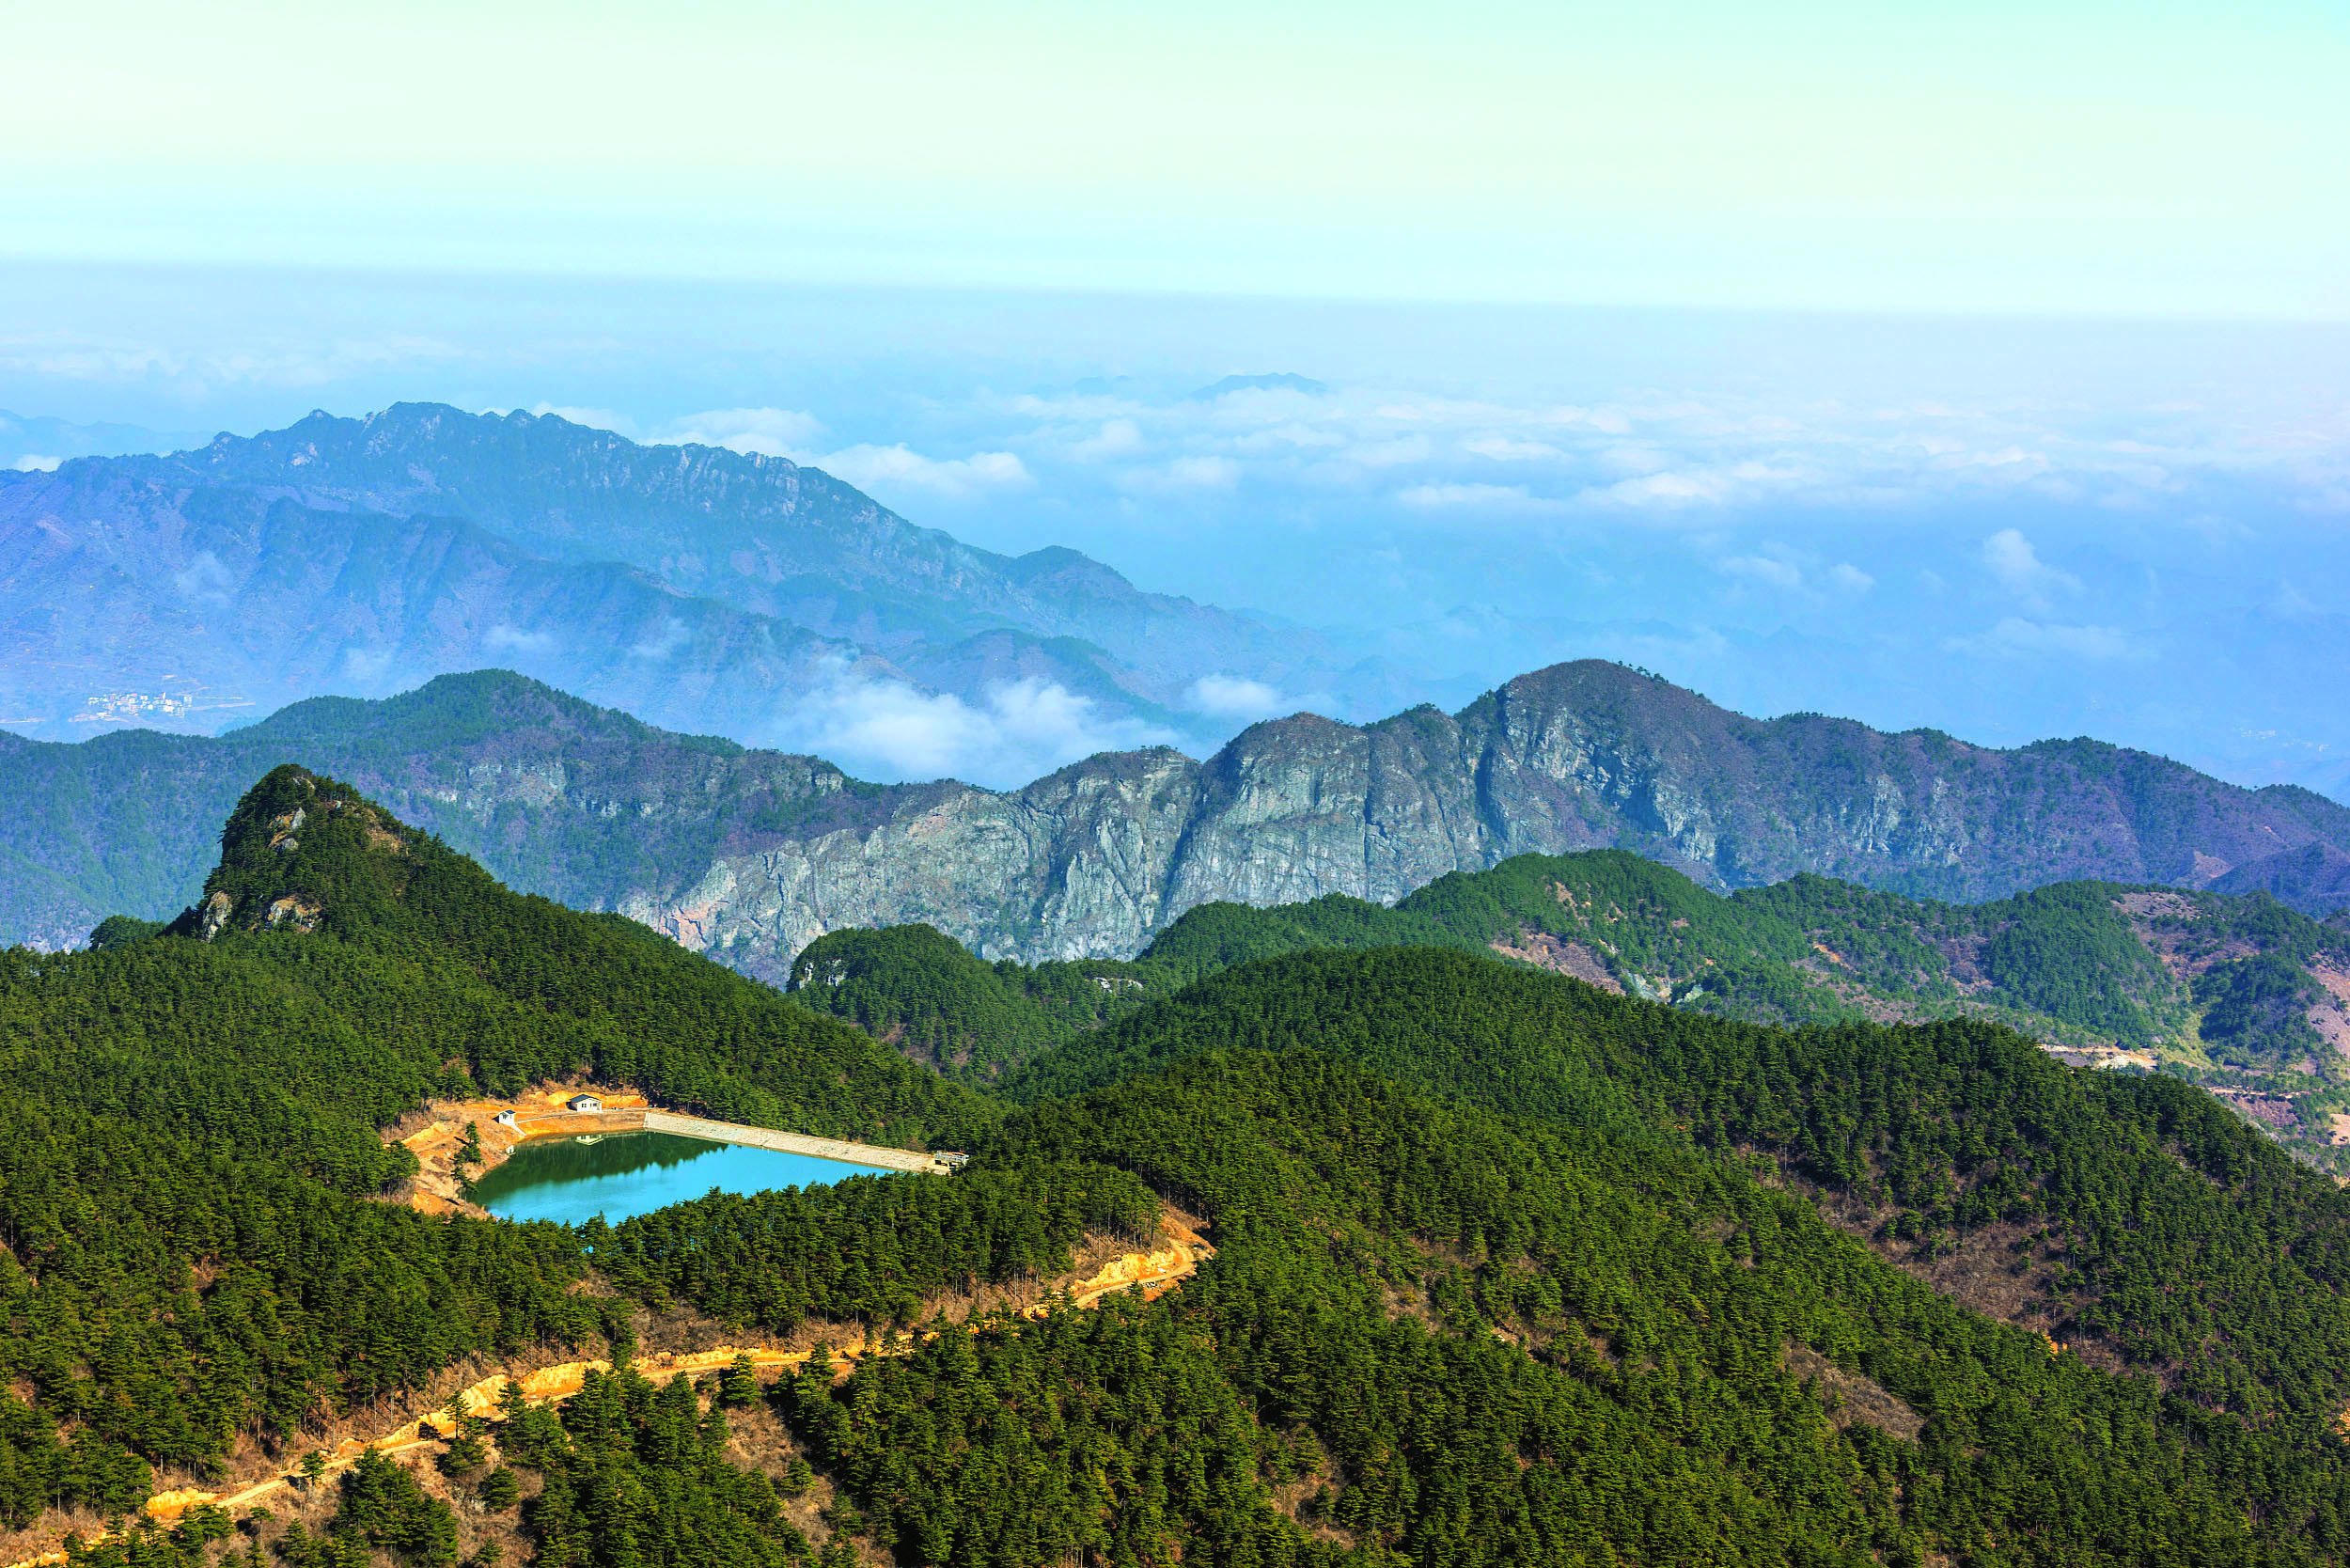 Tianmu Mountain: A Treasure Chest of Flora and Fauna